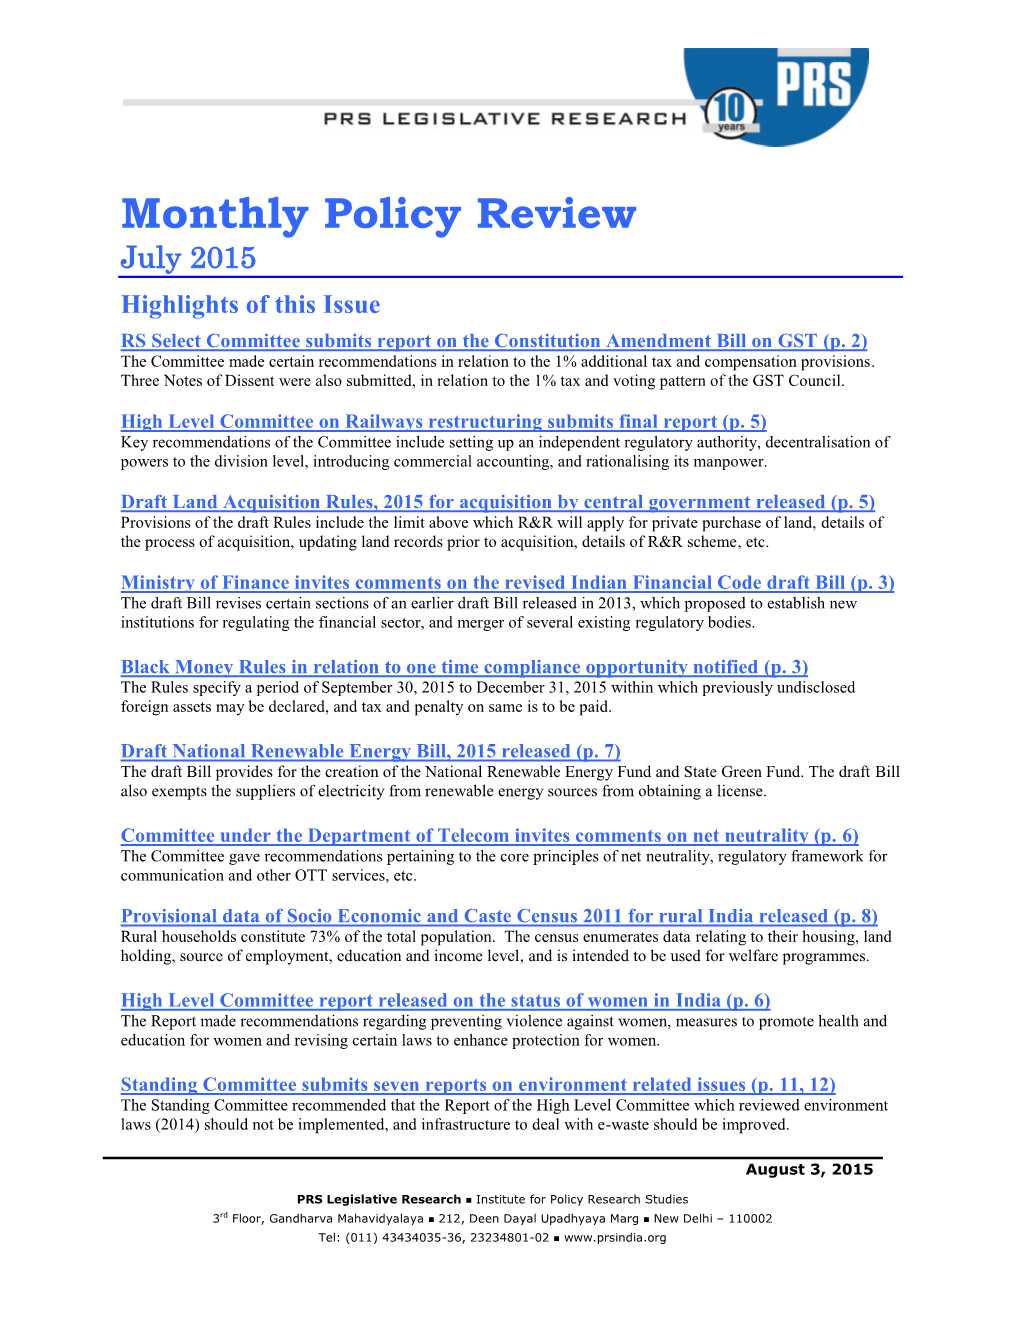 Monthly Policy Review July 2015 Highlights of This Issue RS Select Committee Submits Report on the Constitution Amendment Bill on GST (P